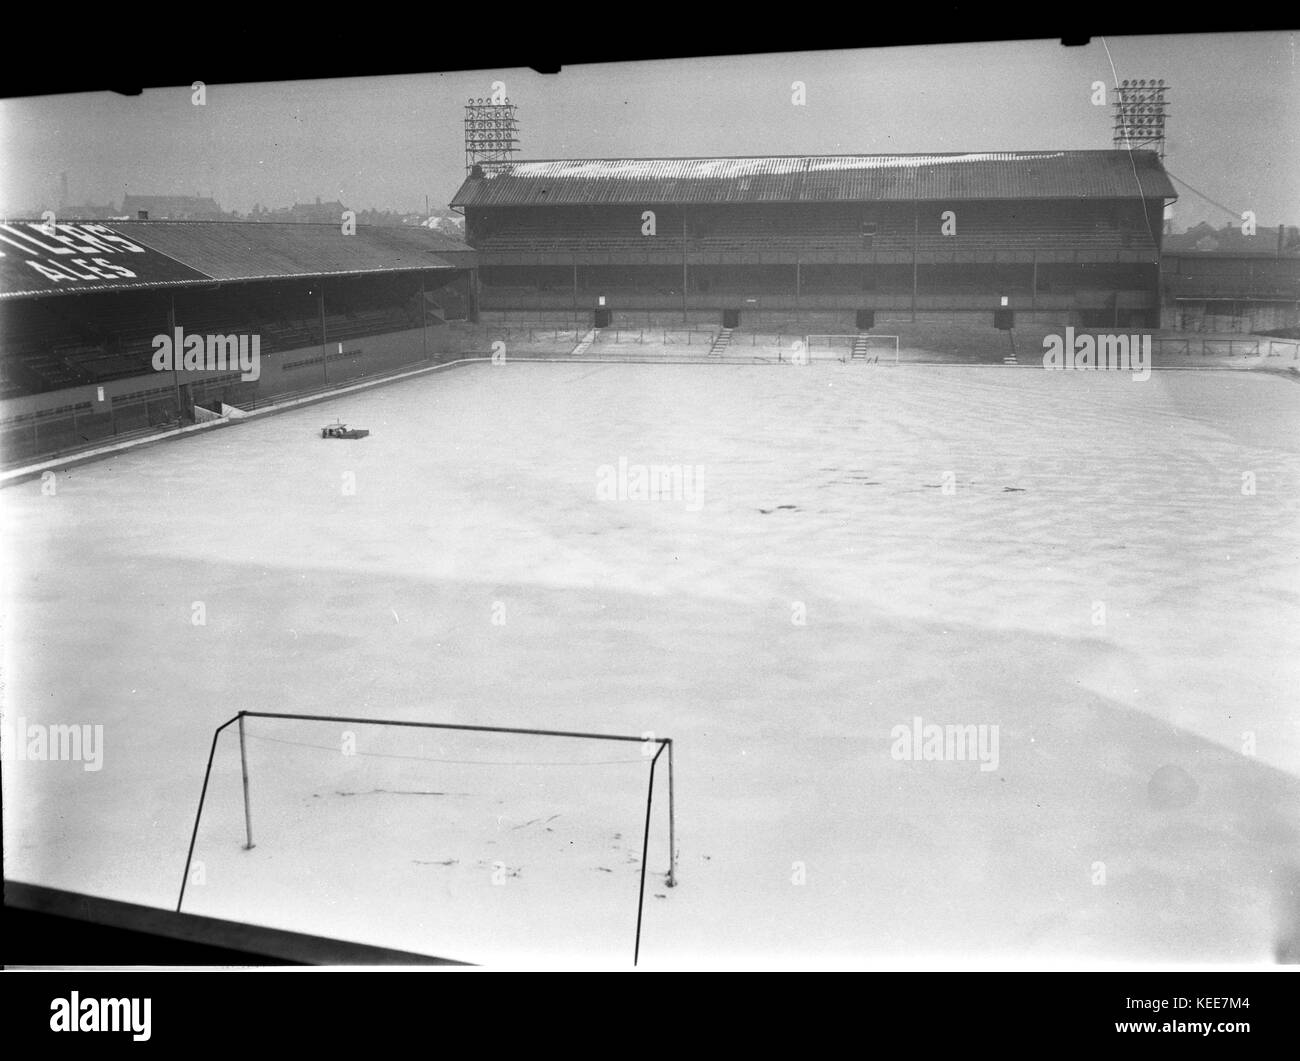 Derby County Football Club stadium from 1895 to 1997 - The Baseball Ground - under snowon 22 January 1963.    Photograph by Tony Henshaw  *** Local Caption *** From the wholly-owned original negative. Stock Photo